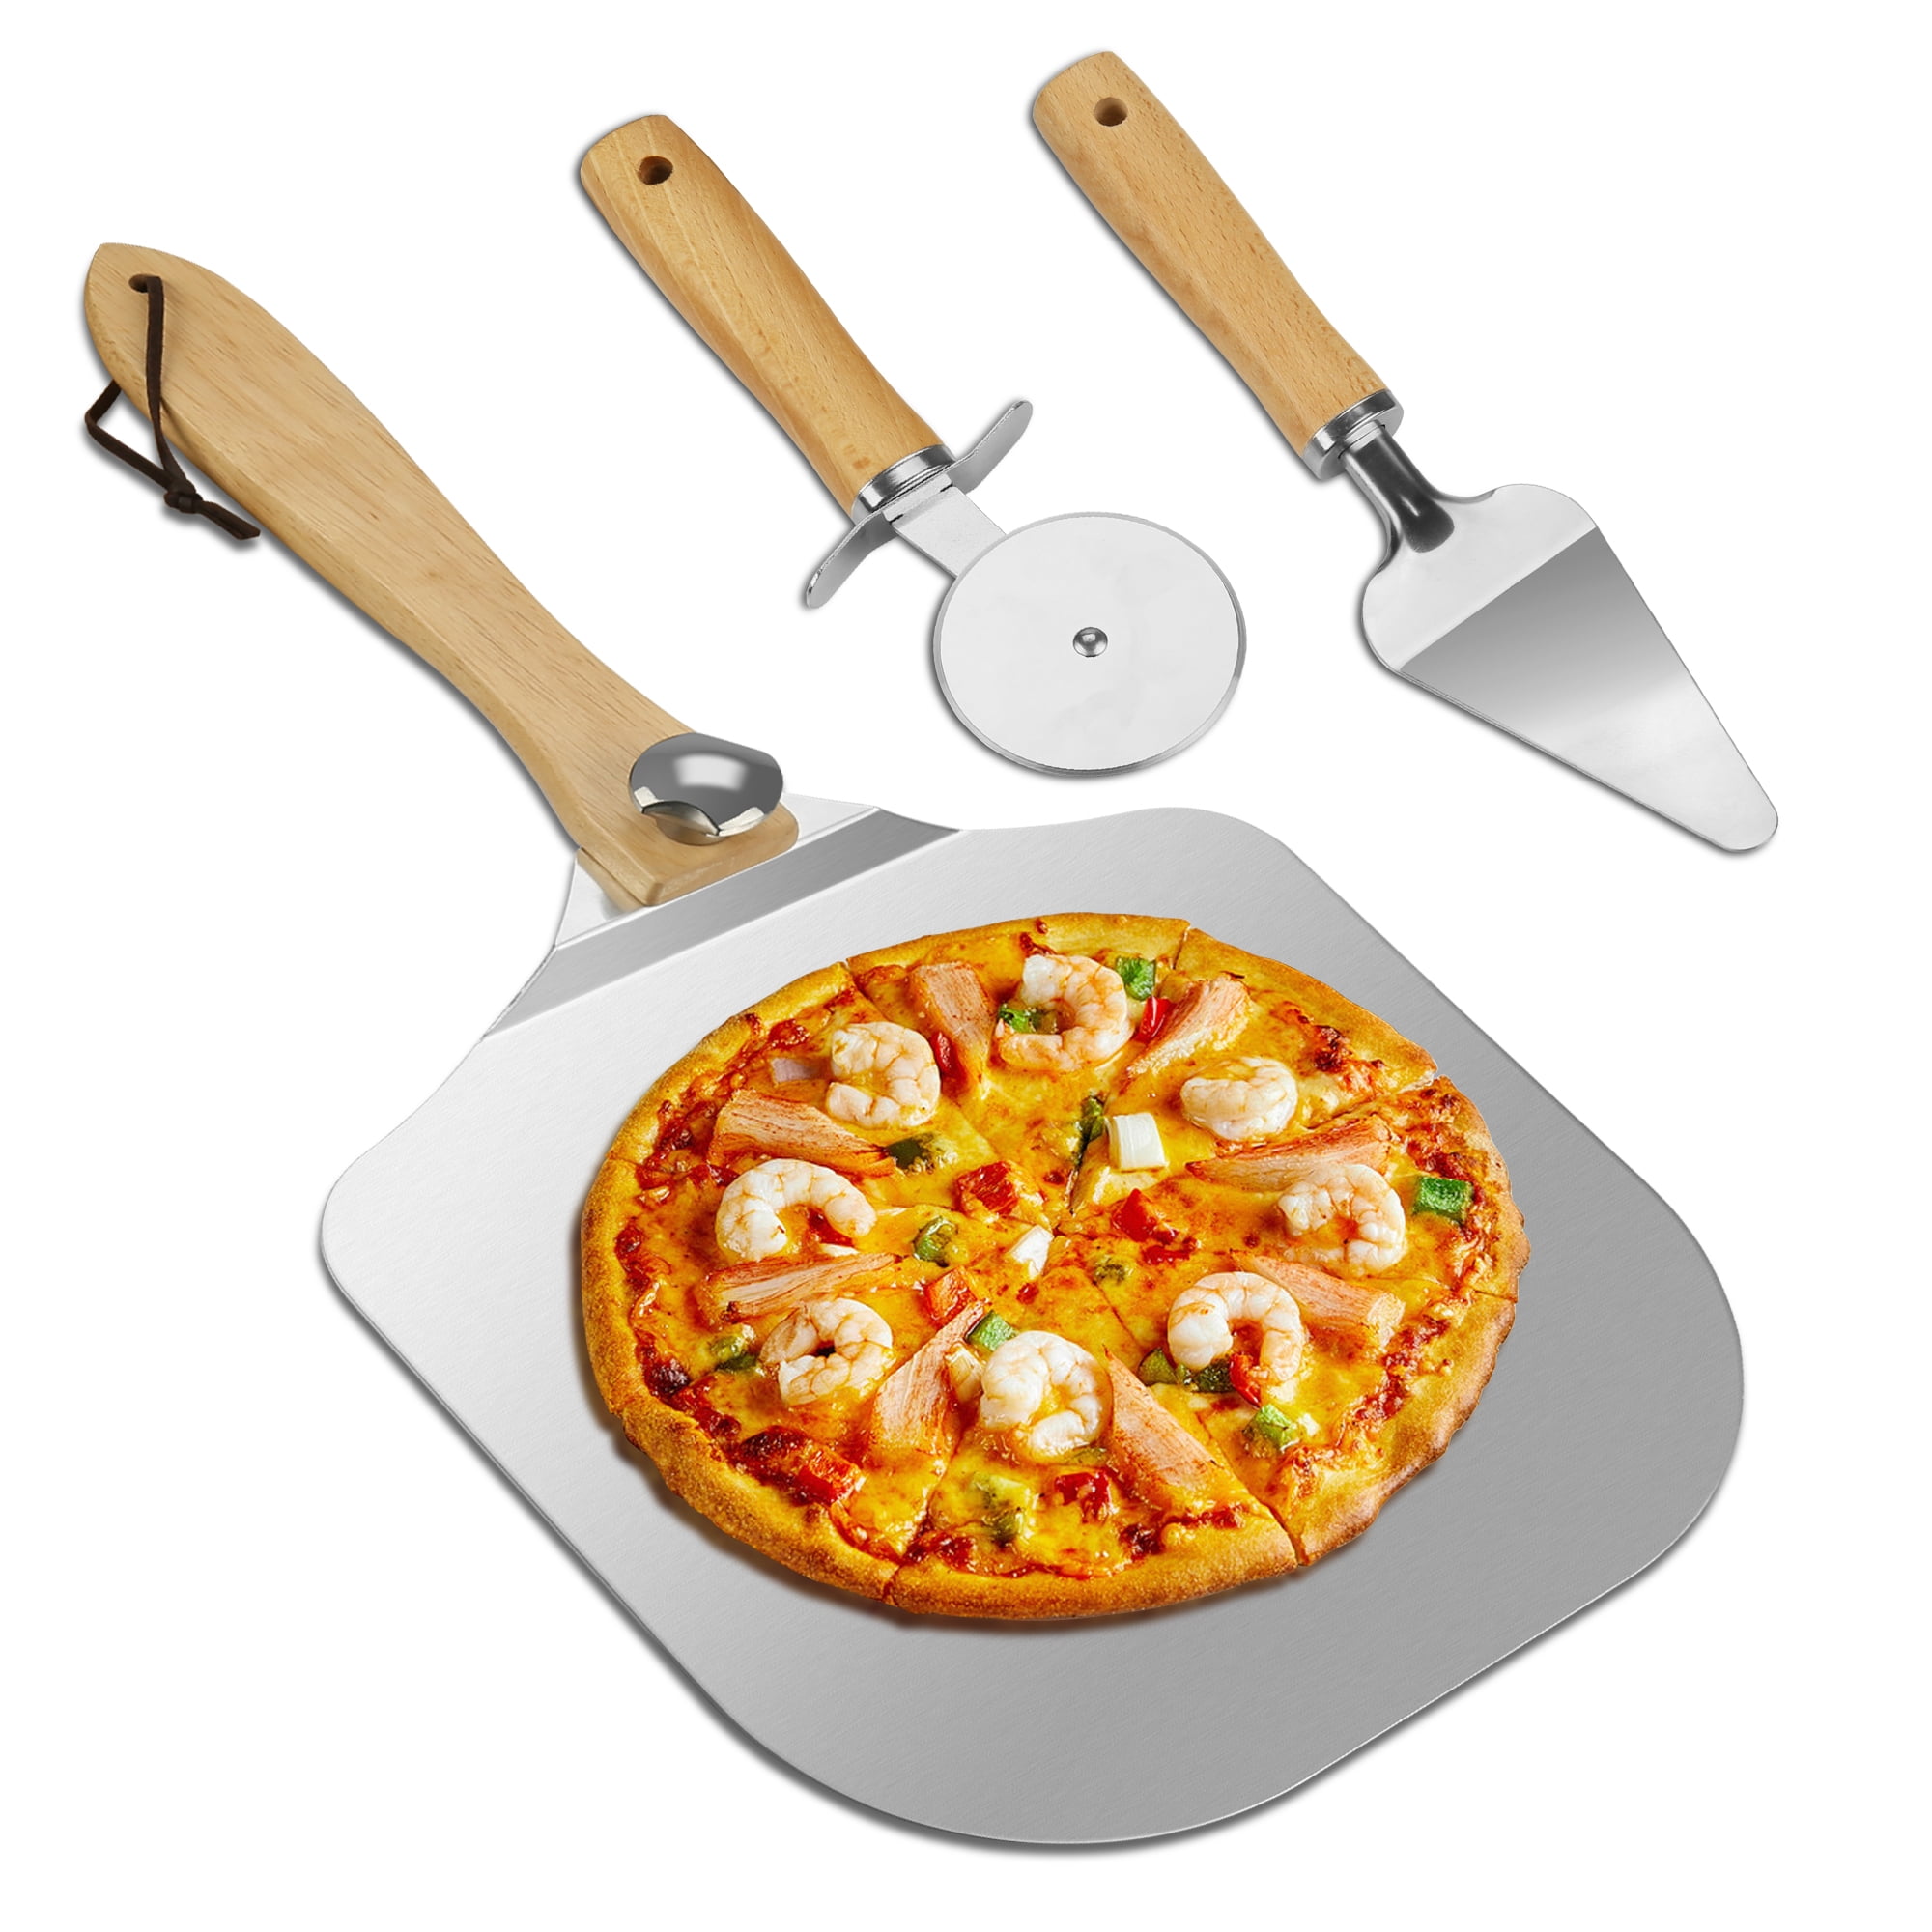 Details about   Stainless Steel Bicycle Pizza Cutter Bike Dual Slicer Chopper Home Kitchen PHEN 